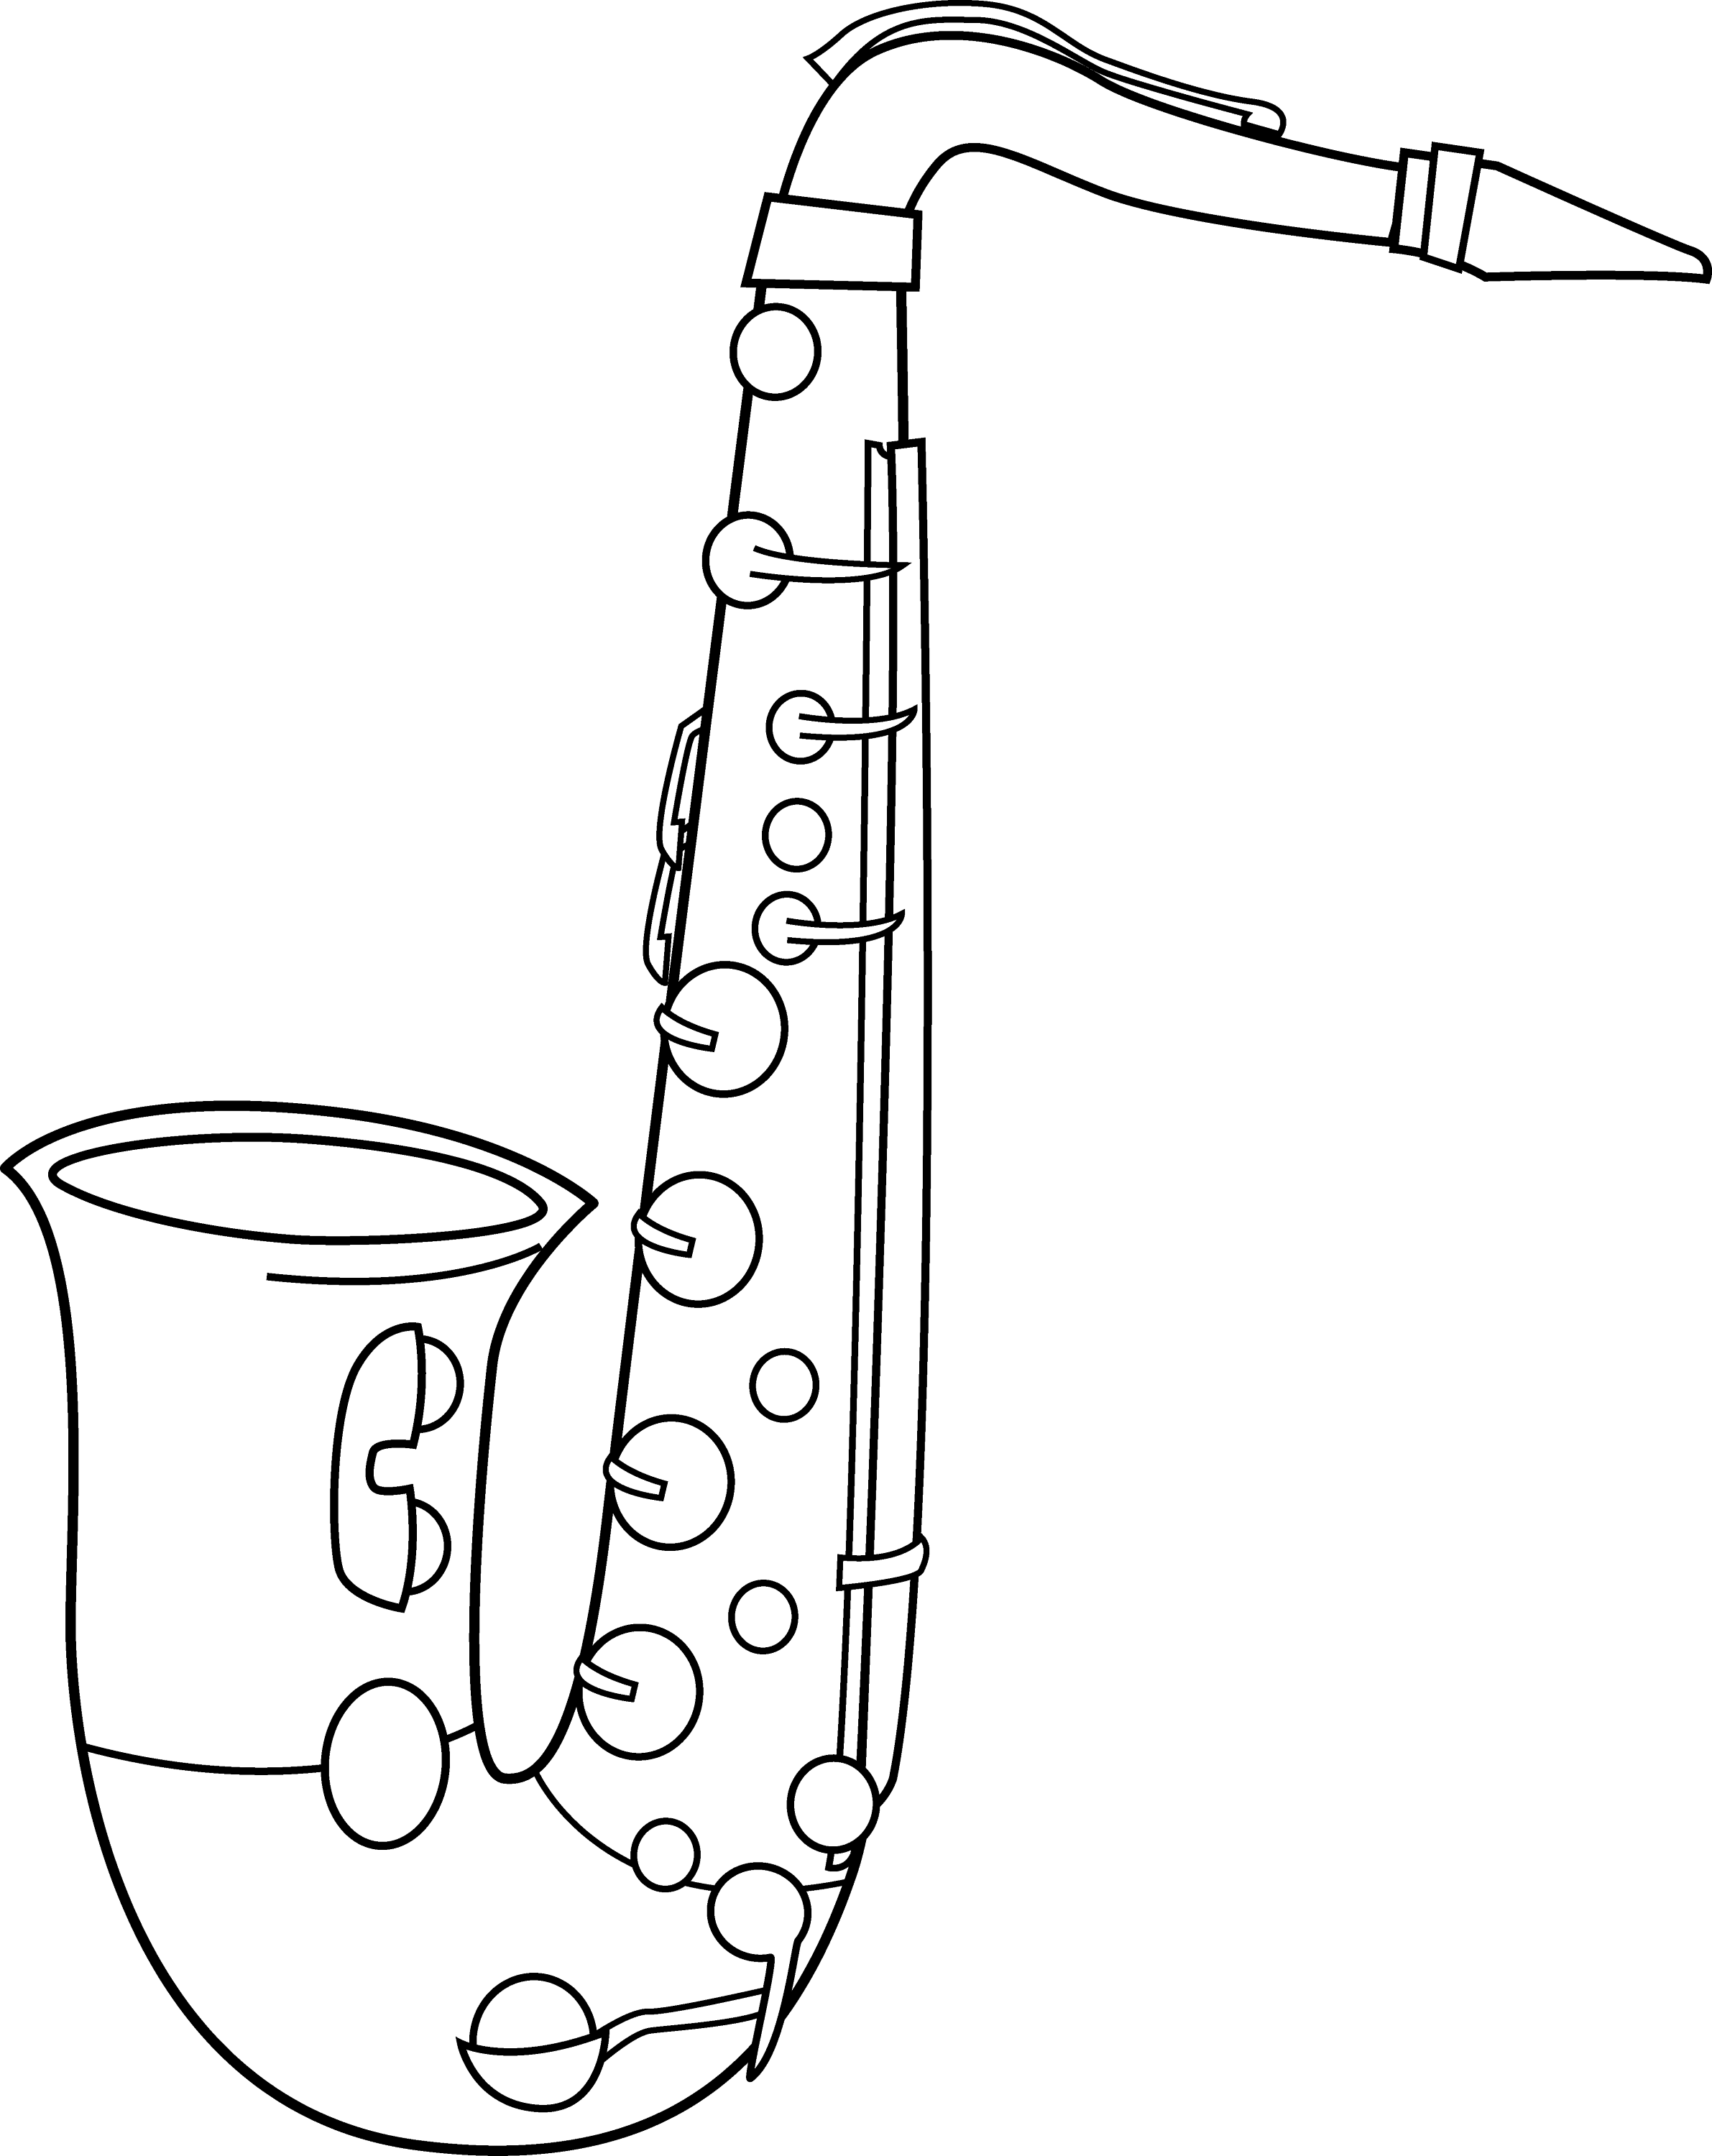 music instruments clipart black and white - photo #41